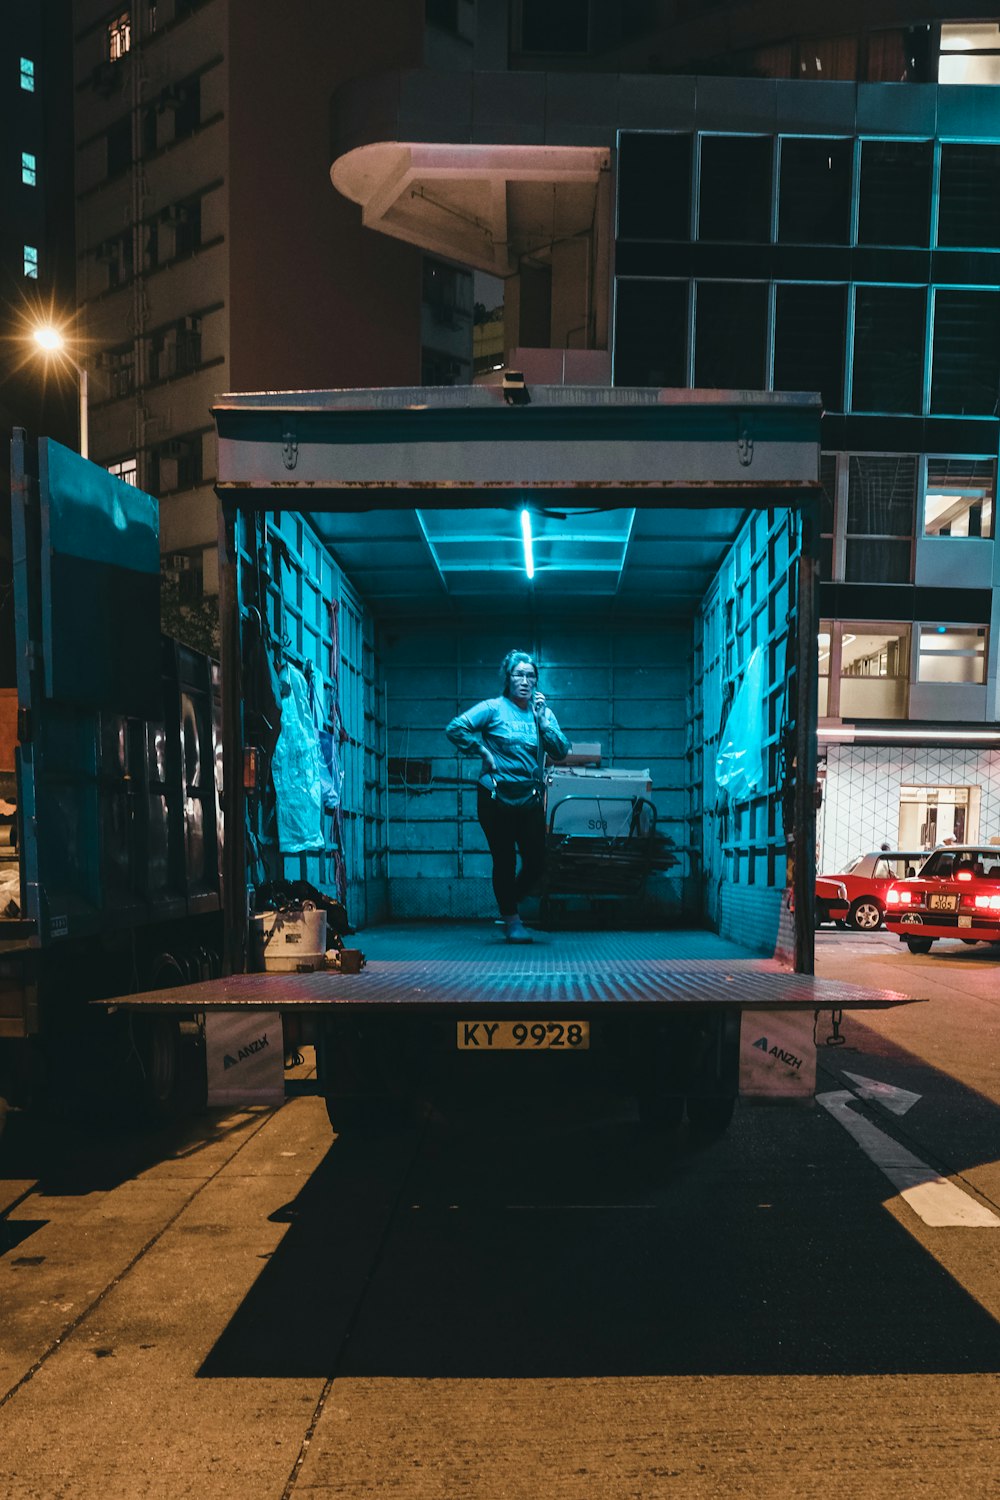 person riding truck during nighttime